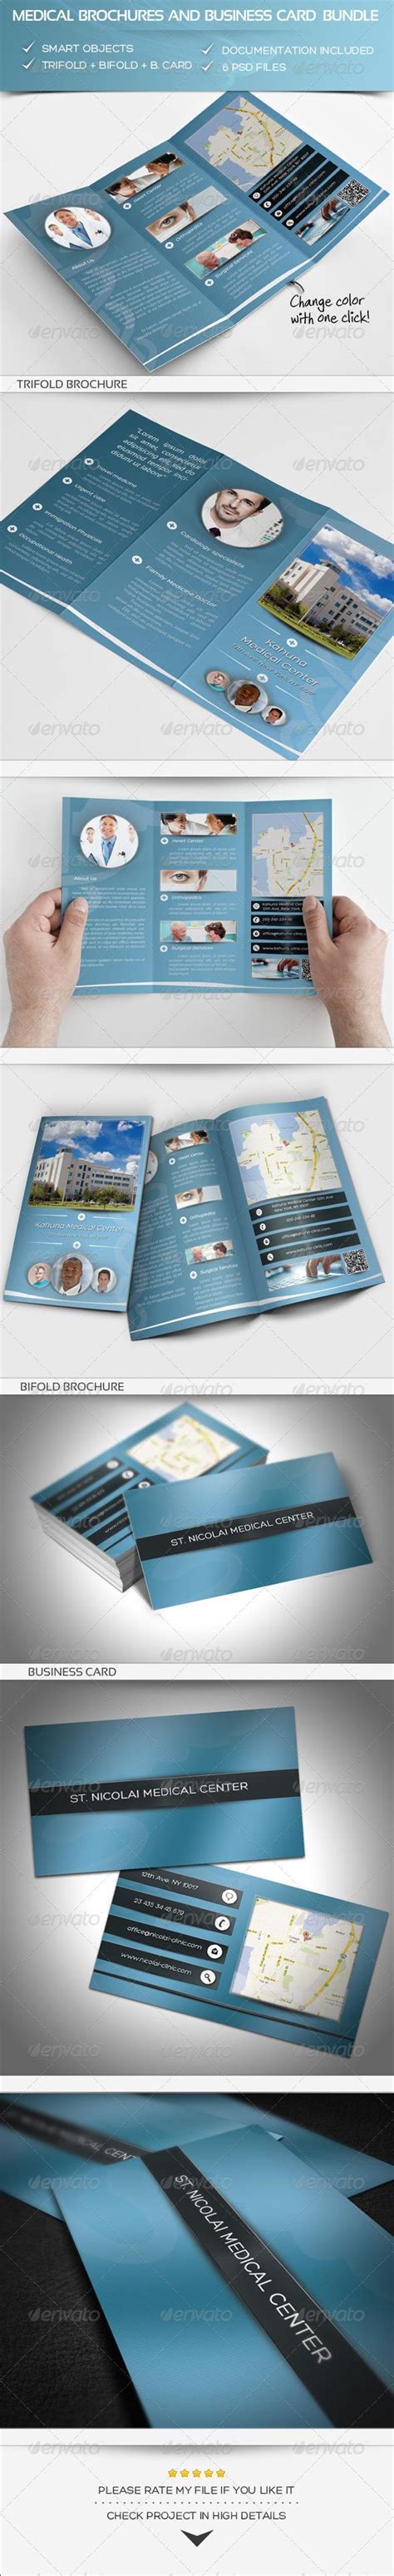 Medical marketing is difficult because advertising this is hard to do with a business card, billboard or digital ads. Medical Bundle | Medical business card, Medical business ...